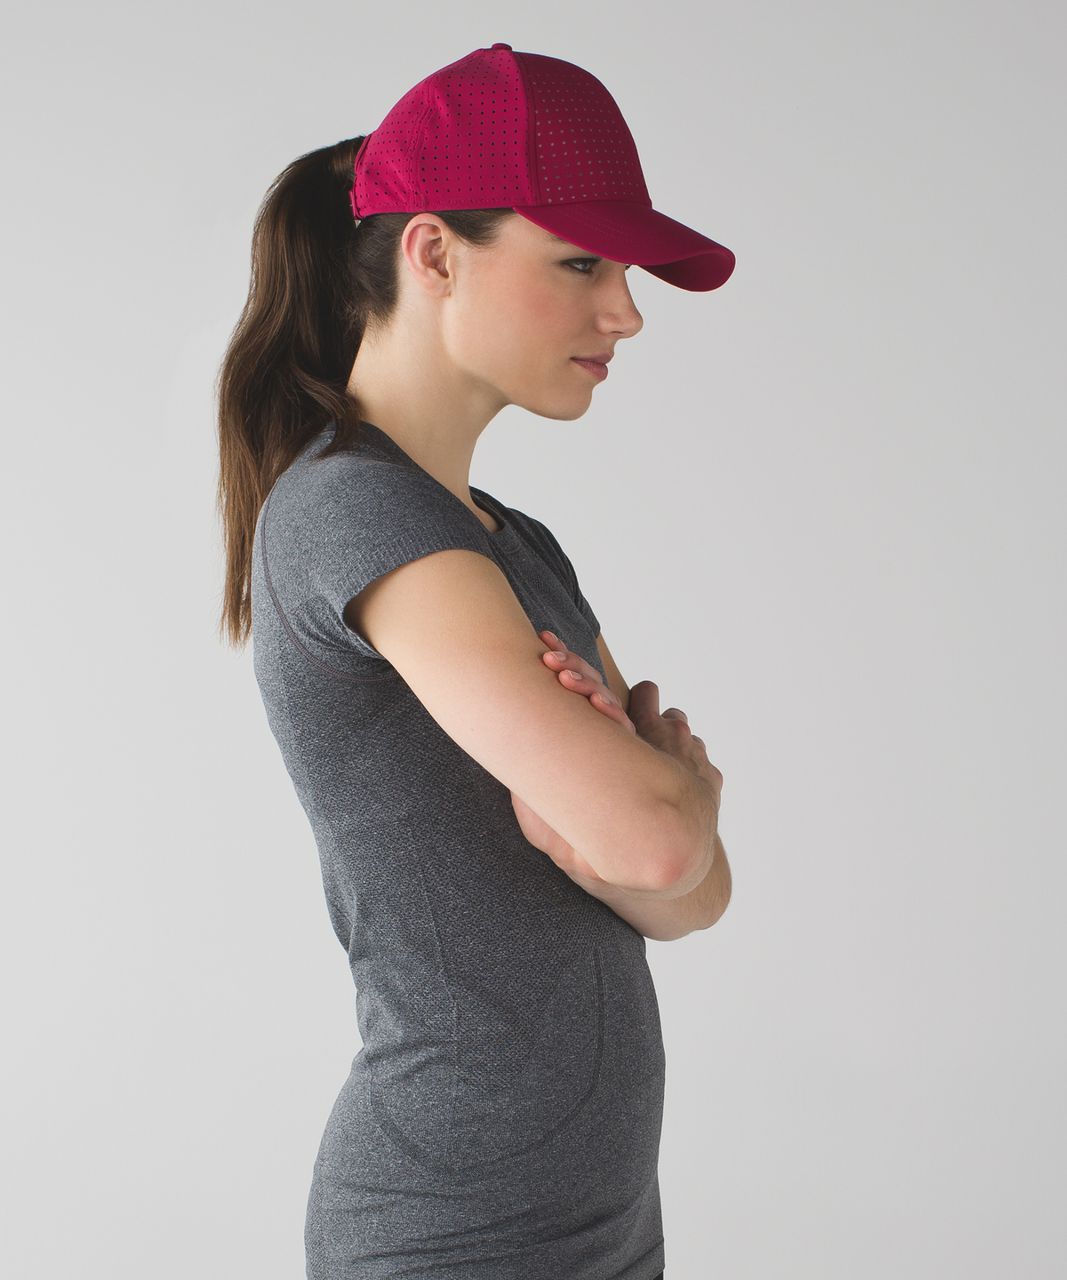 Lululemon Baller Hat (Perforated) - Berry Rumble / Berry Rumble